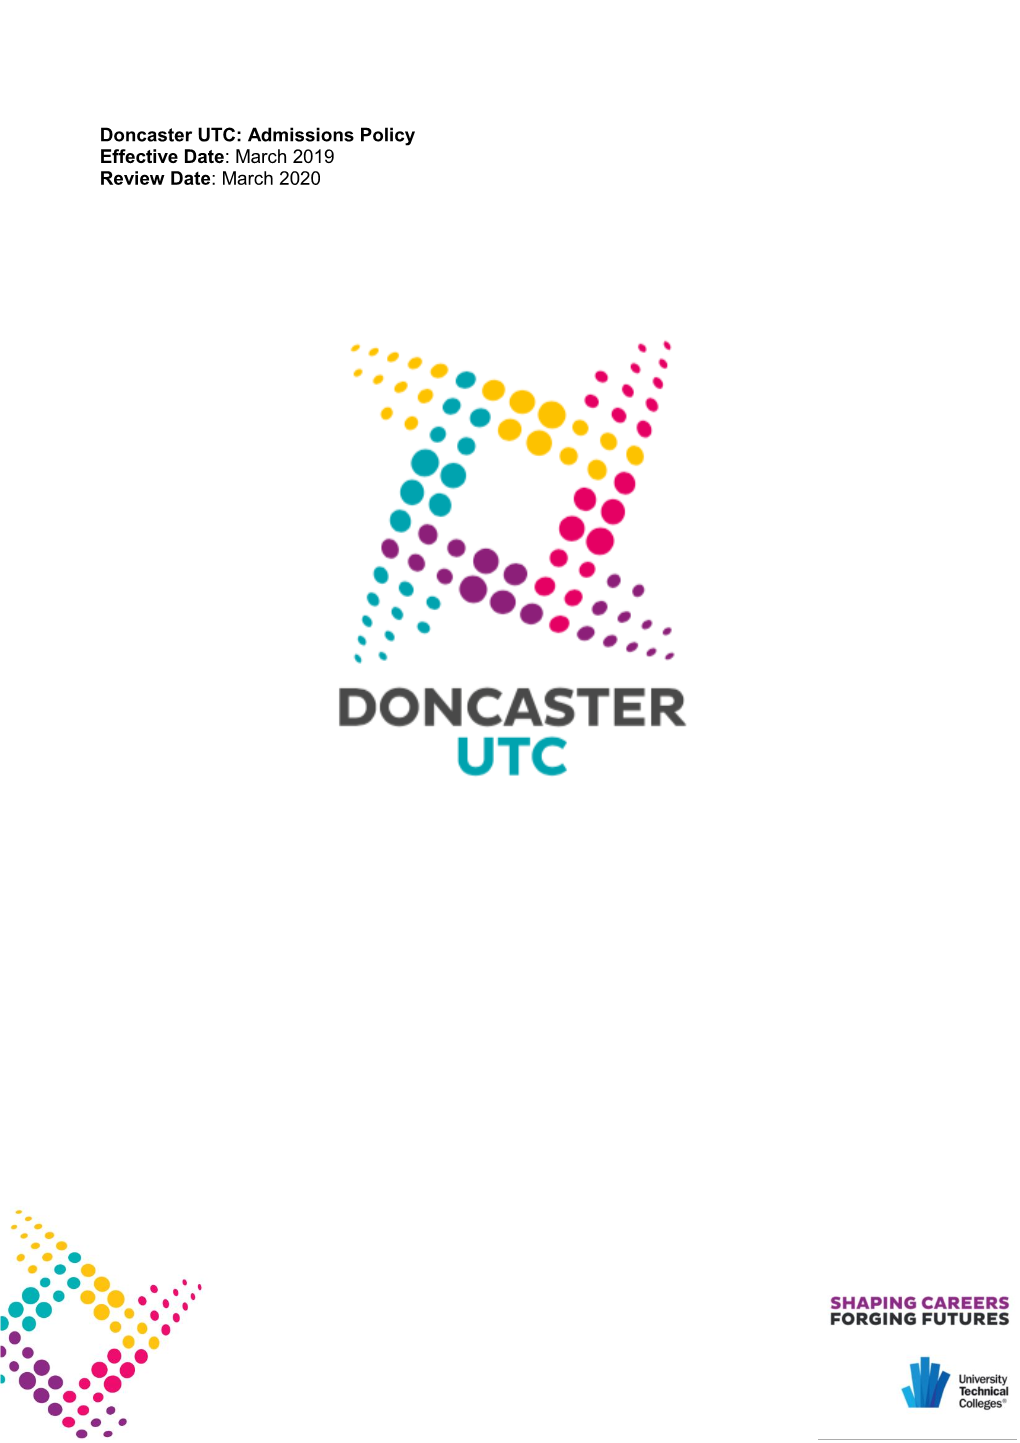 Doncaster UTC: Admissions Policy Effective Date: March 2019 Review Date: March 2020